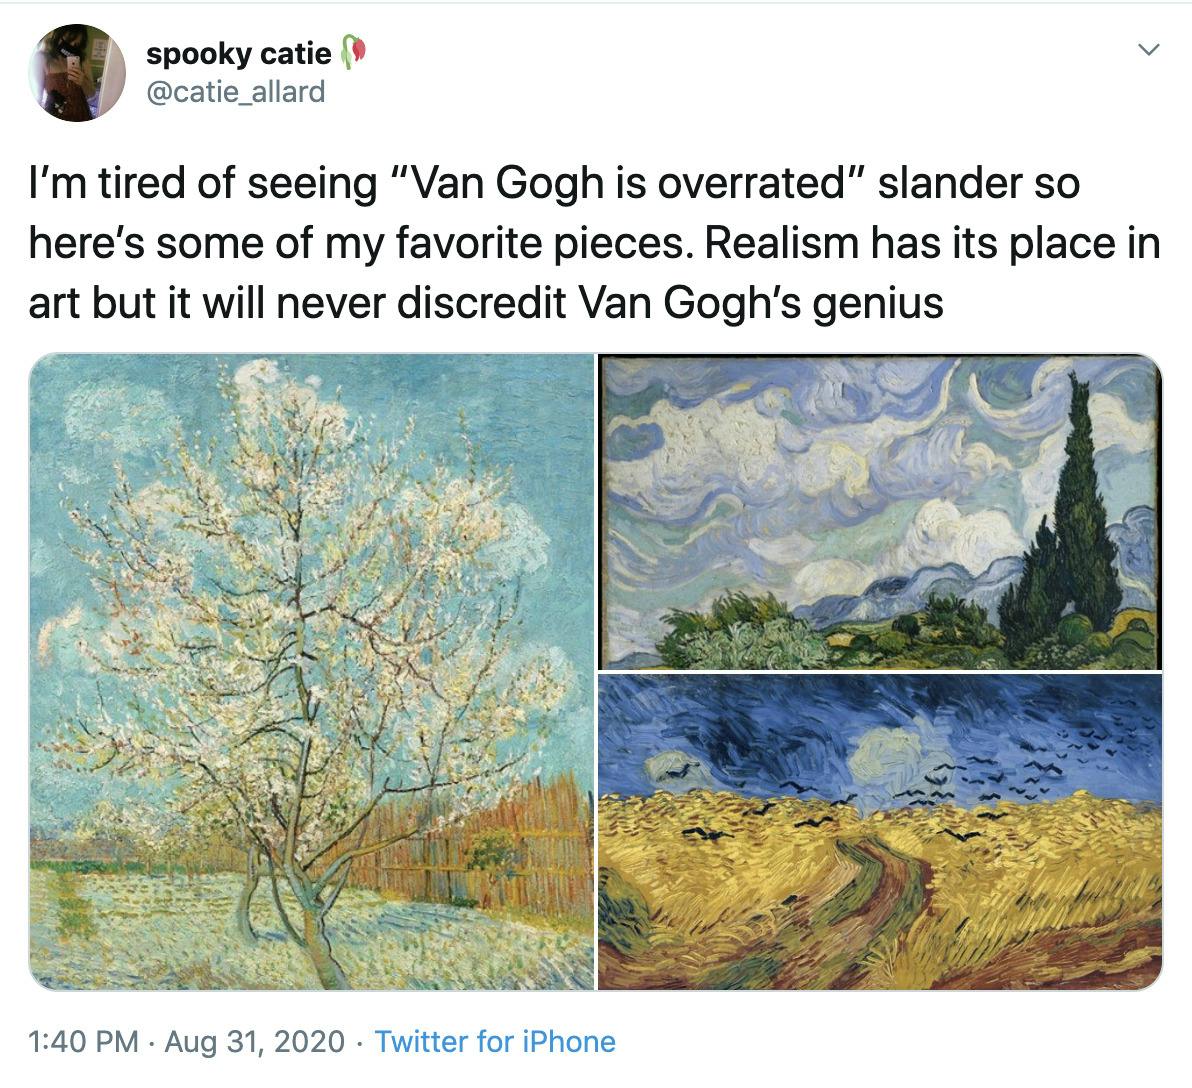 "Photo realism is great, I dont discount the amount of skill it takes and several mediums of art (Video Games for example) can make great use of it. That said Van Gogh wasn't about realism, it was about taking how HE saw the world and putting on a canvas for us all to enjoy." screenshot of the original tweet